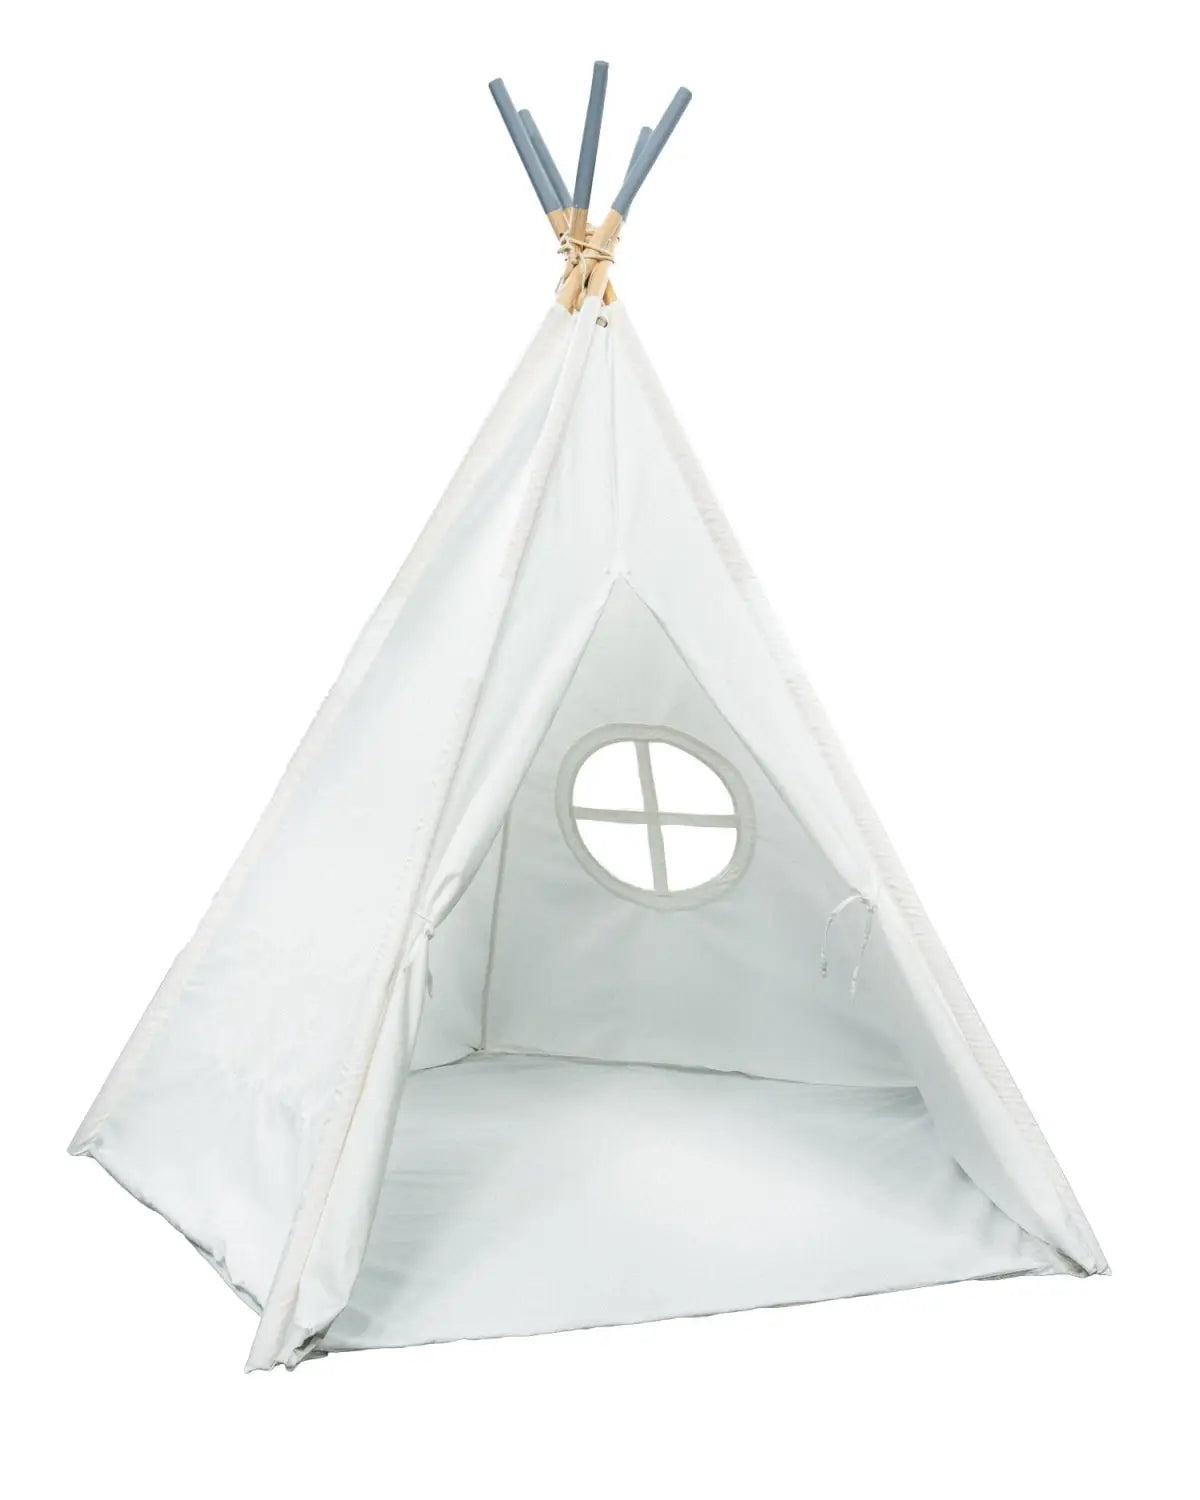 Teepee-licious: A Fun and Funtastic Collection of Teepees for Kids!